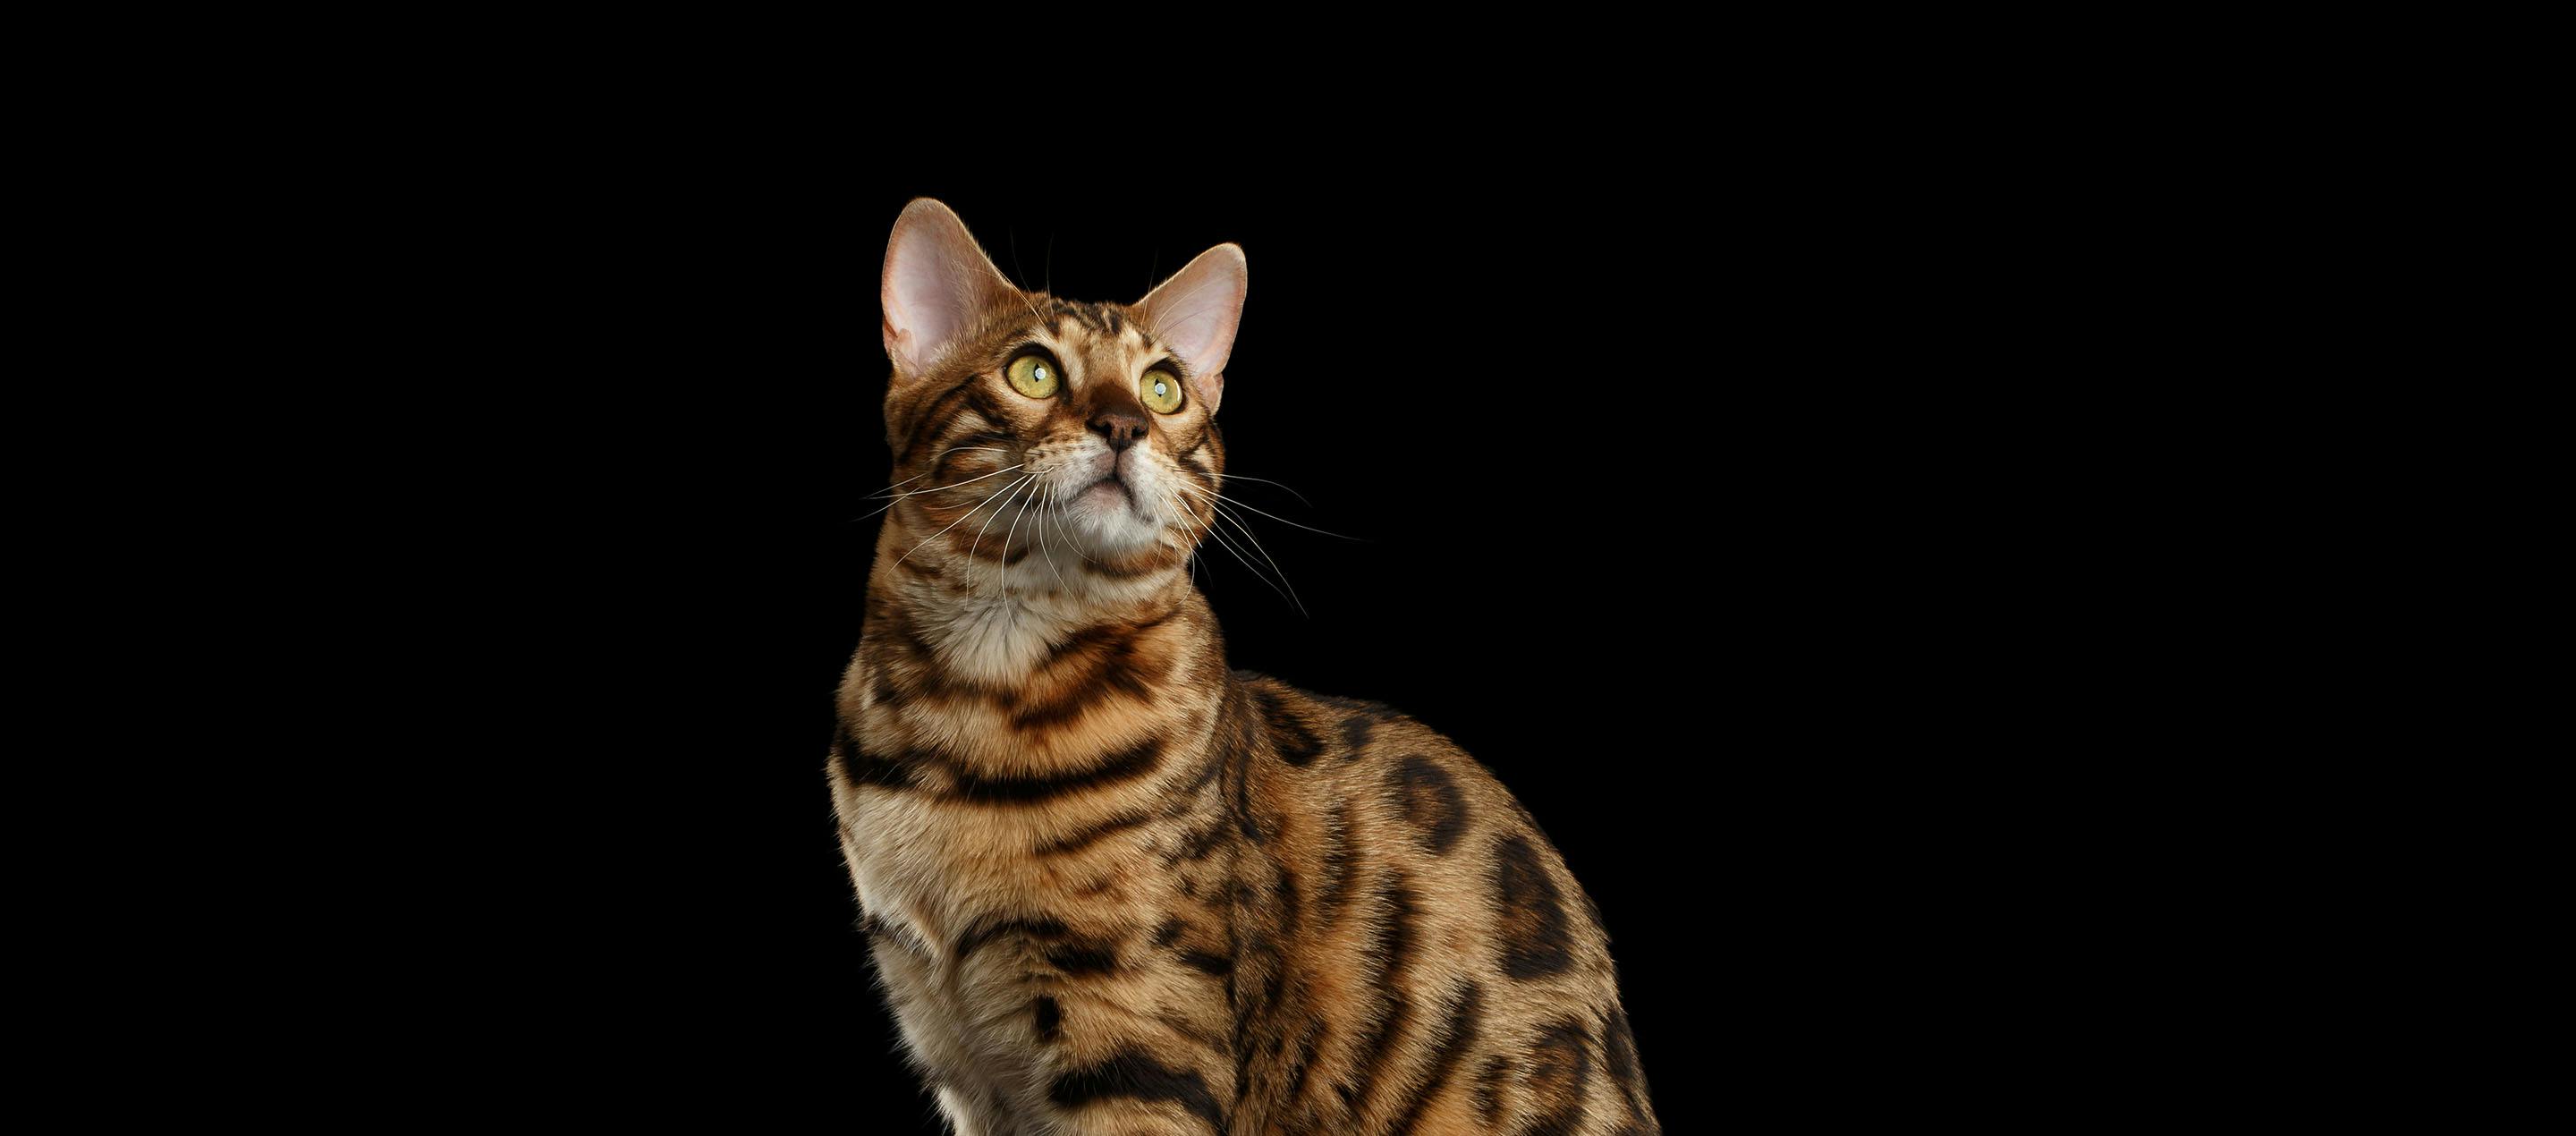 Wild Cats at Home: A Guide to Understanding and Caring for Hybrid Cat Breeds like Bengal and Savannah - Pros and Cons